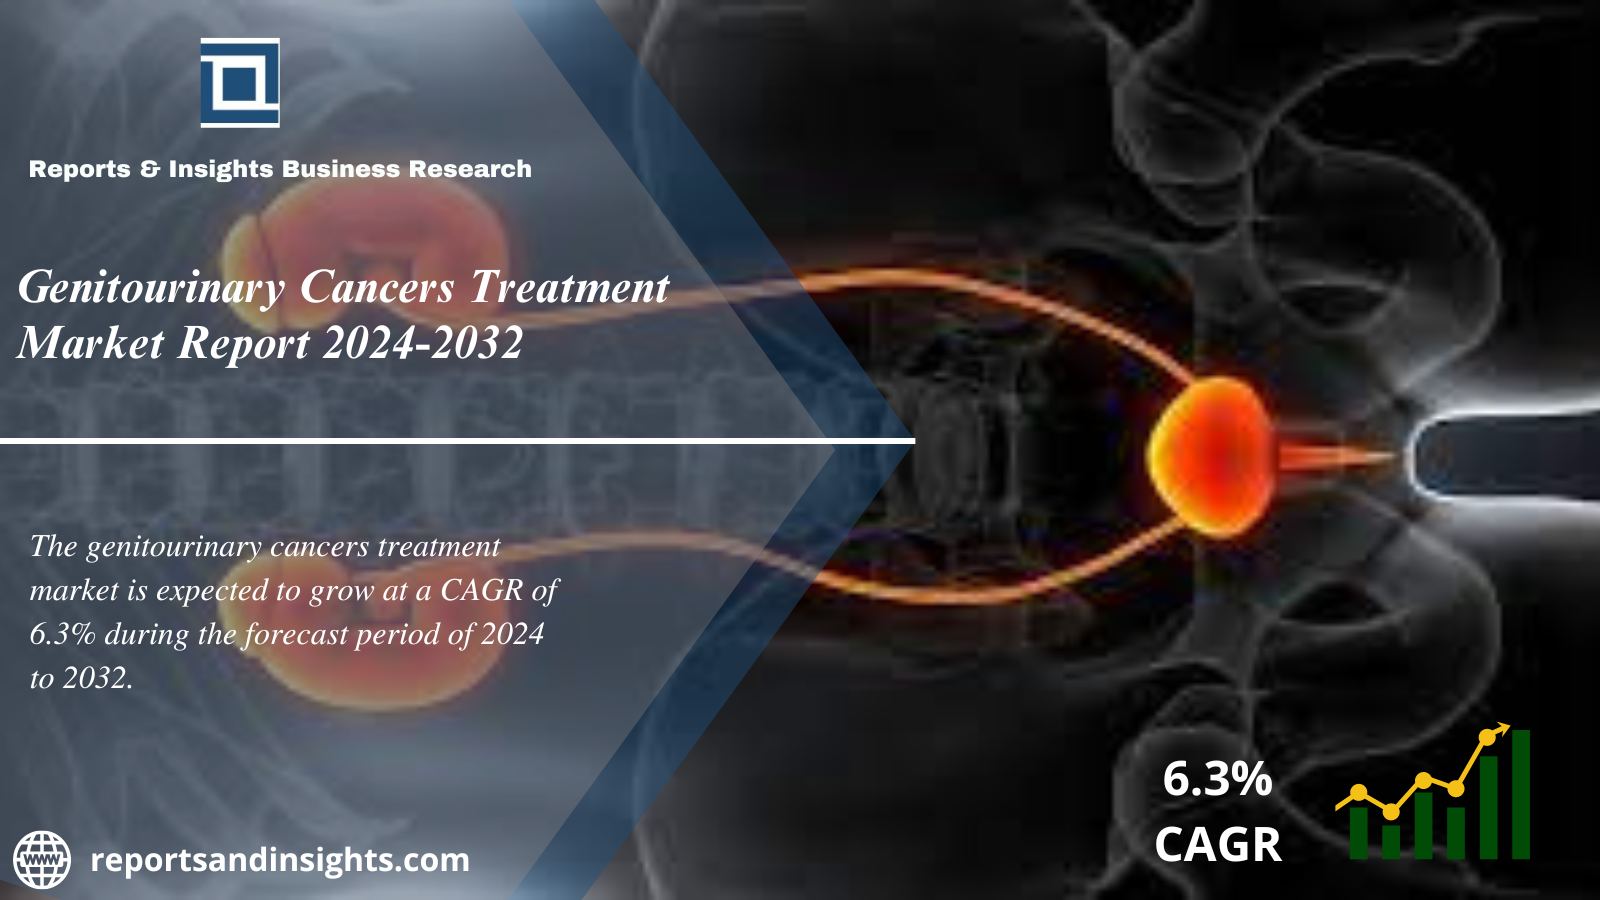 Genitourinary Cancers Treatment Market Report, Size, Share, Trends, Growth, Demand and Forecast 2024 to 2032